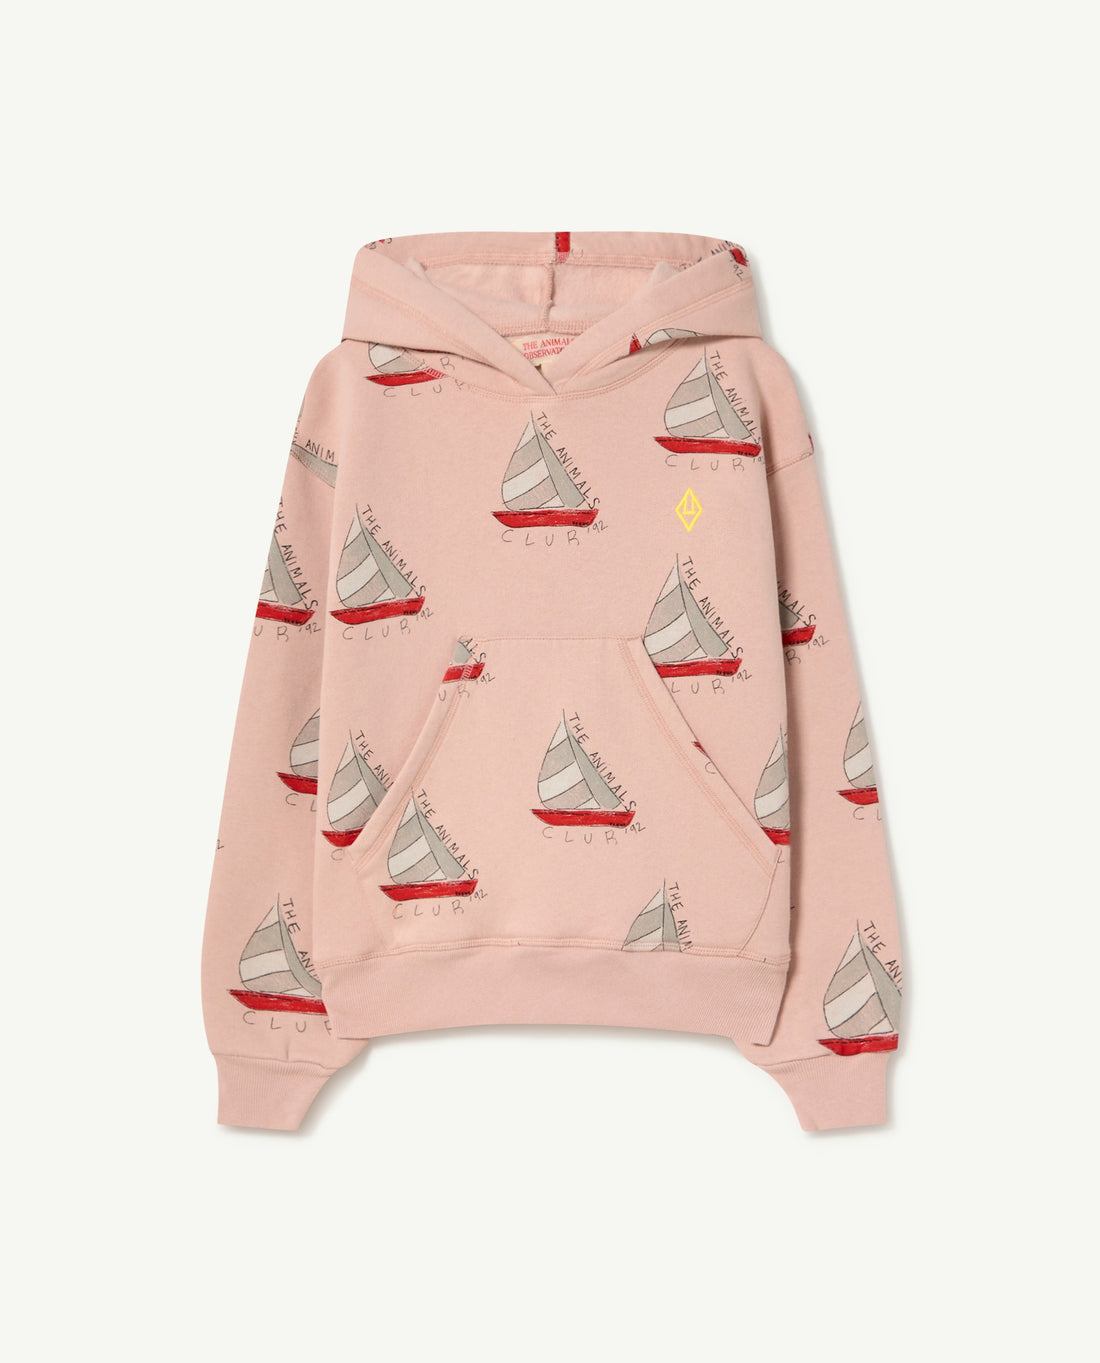 The animals observatory - Beaver kids sweater - Rose boats